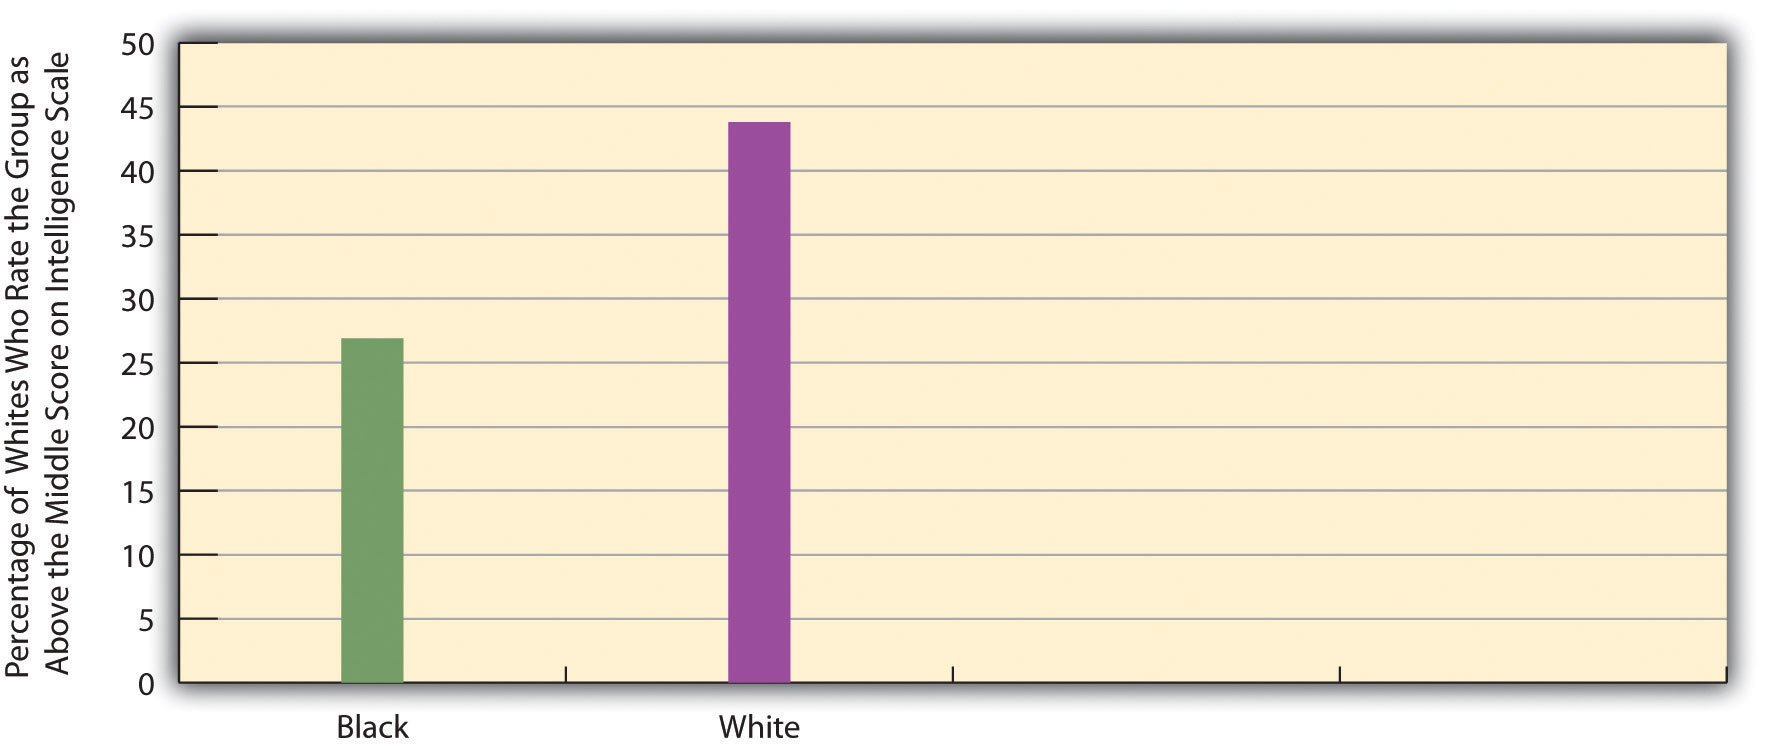 Chart showing that white respondents in the General Social Survey (GSS), a recurring survey of a random sample of the US population, are less likely to think Blacks are intelligent than they are to think whites are intelligent.